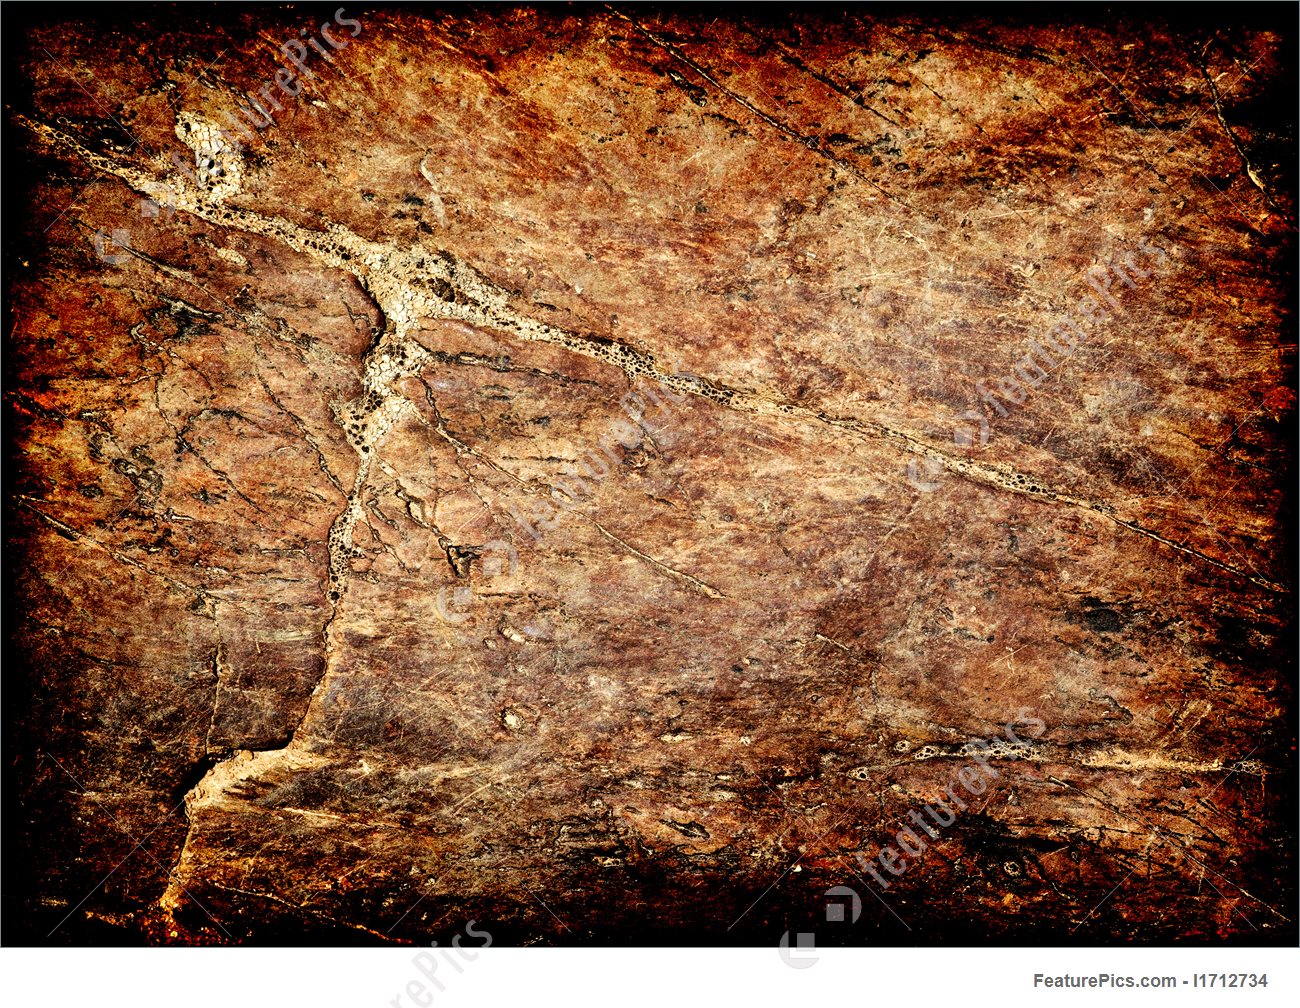 Texture Rock Background Stock Image I1712734 At Featurepics